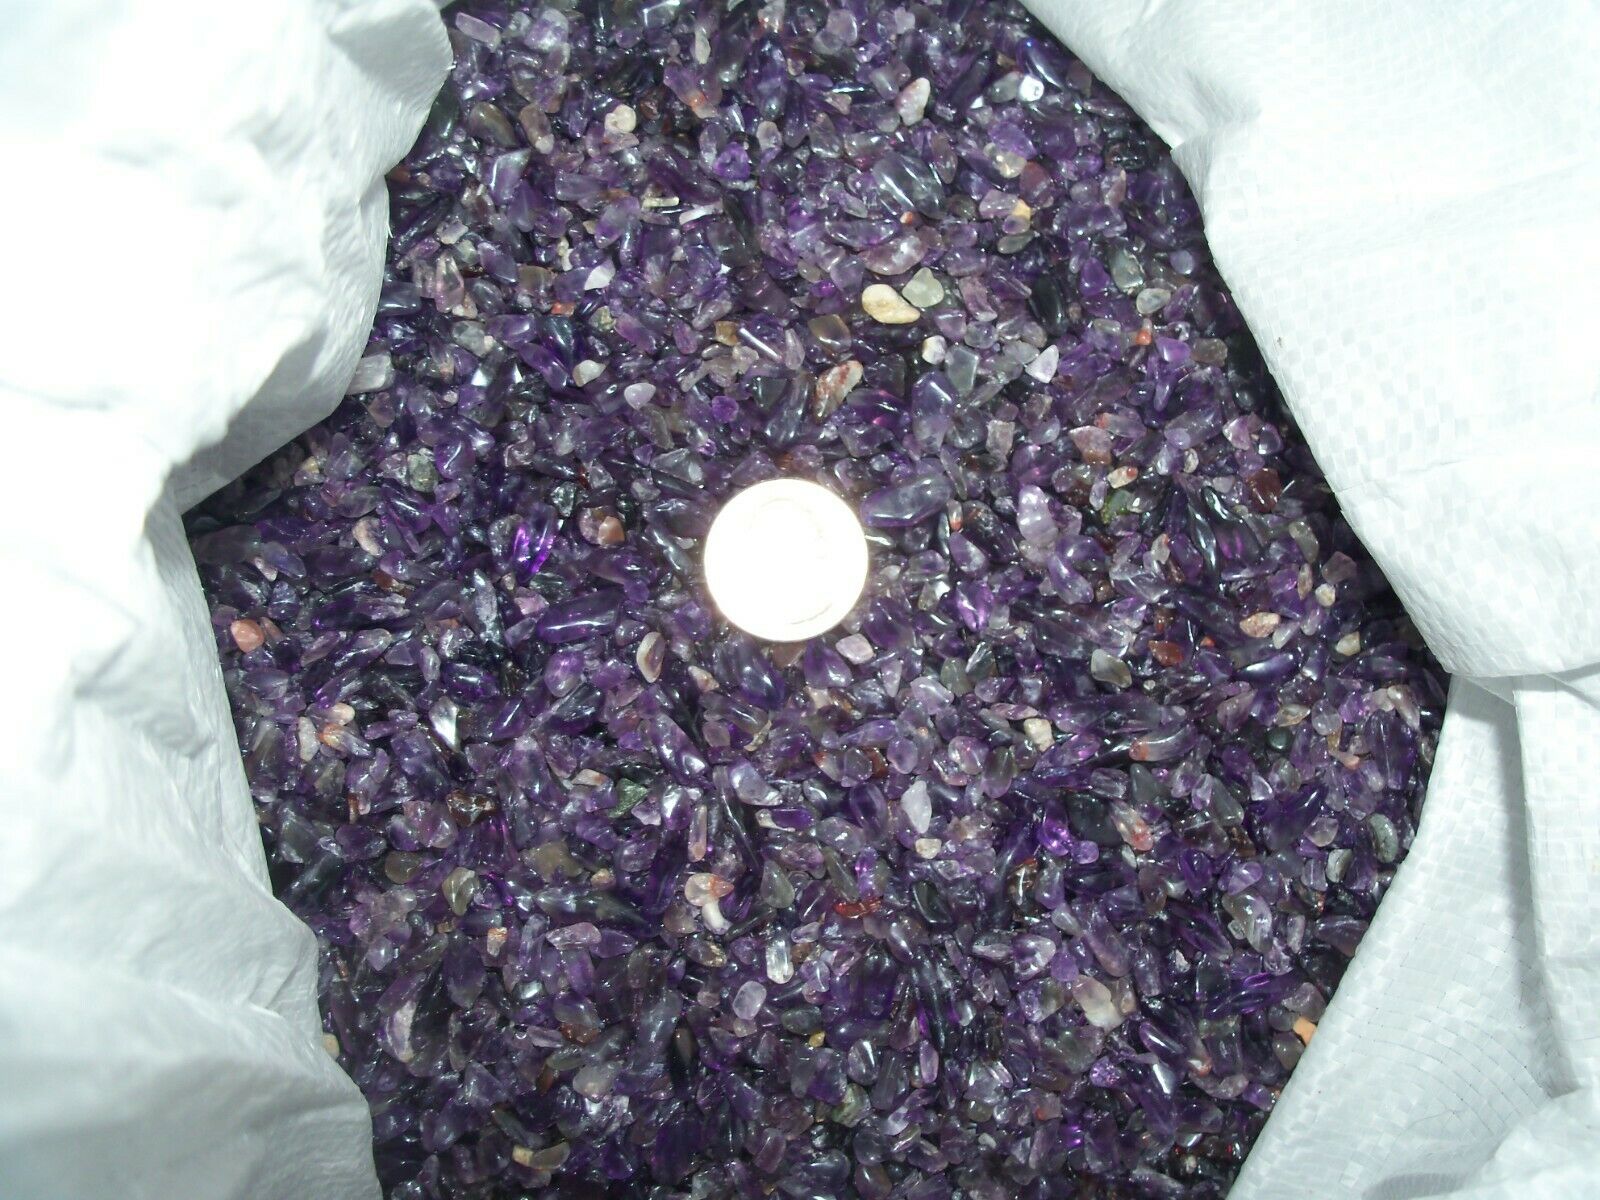 1/4 Pound Lb Of Purple Polished Amethyst Geodes Crystals Per Lot. 400 To 800